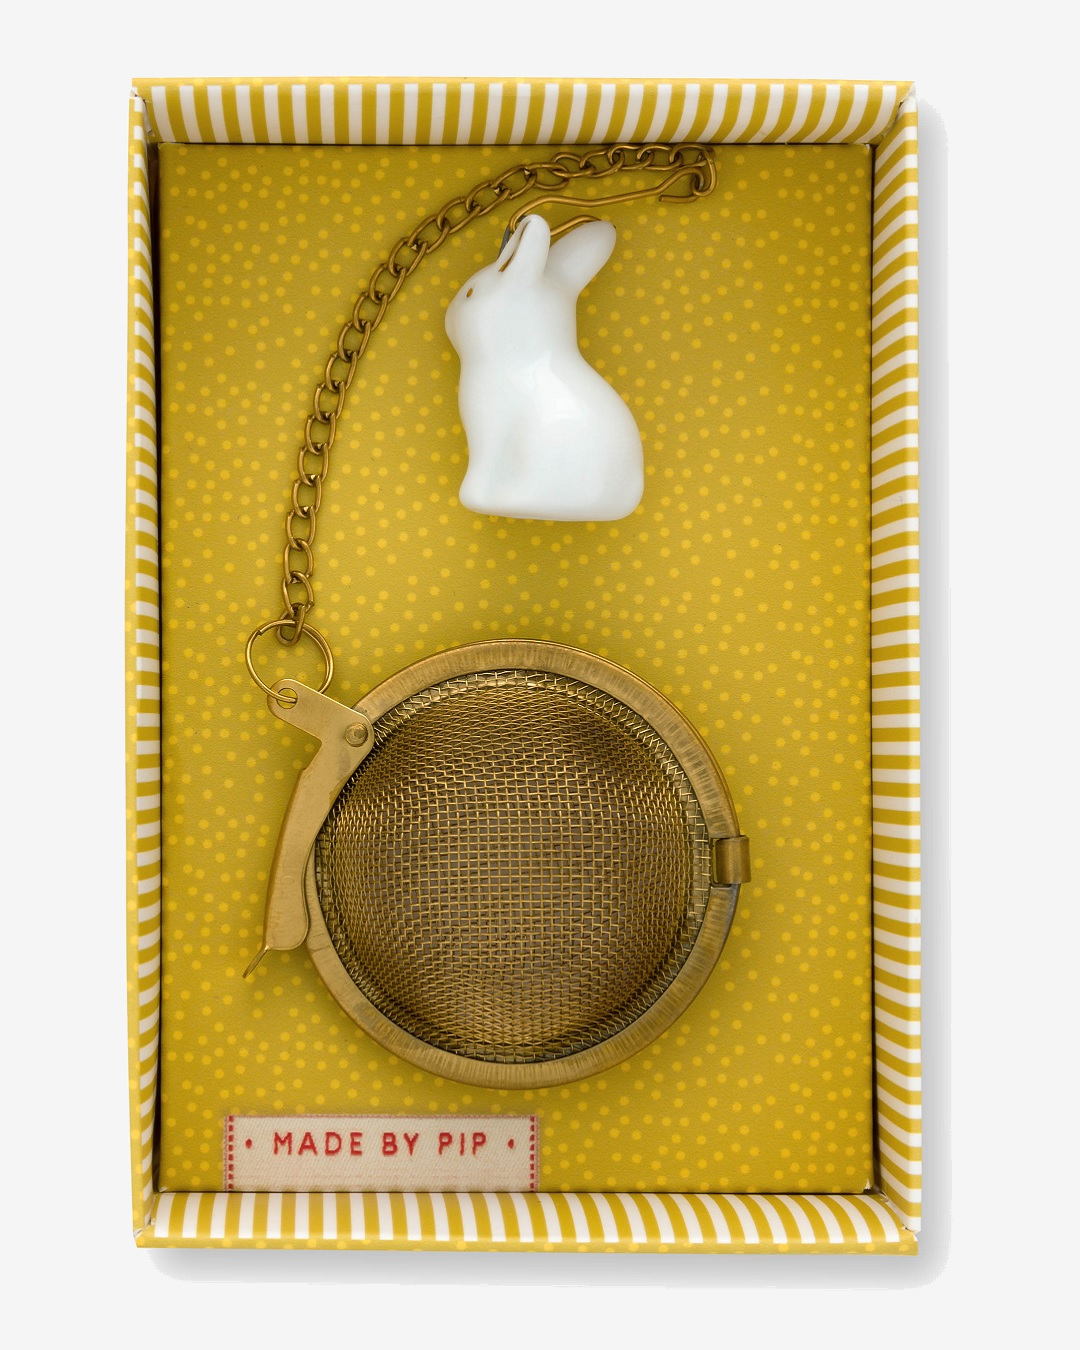 White Rabbit tea infuser with gold tea basket in yellow box